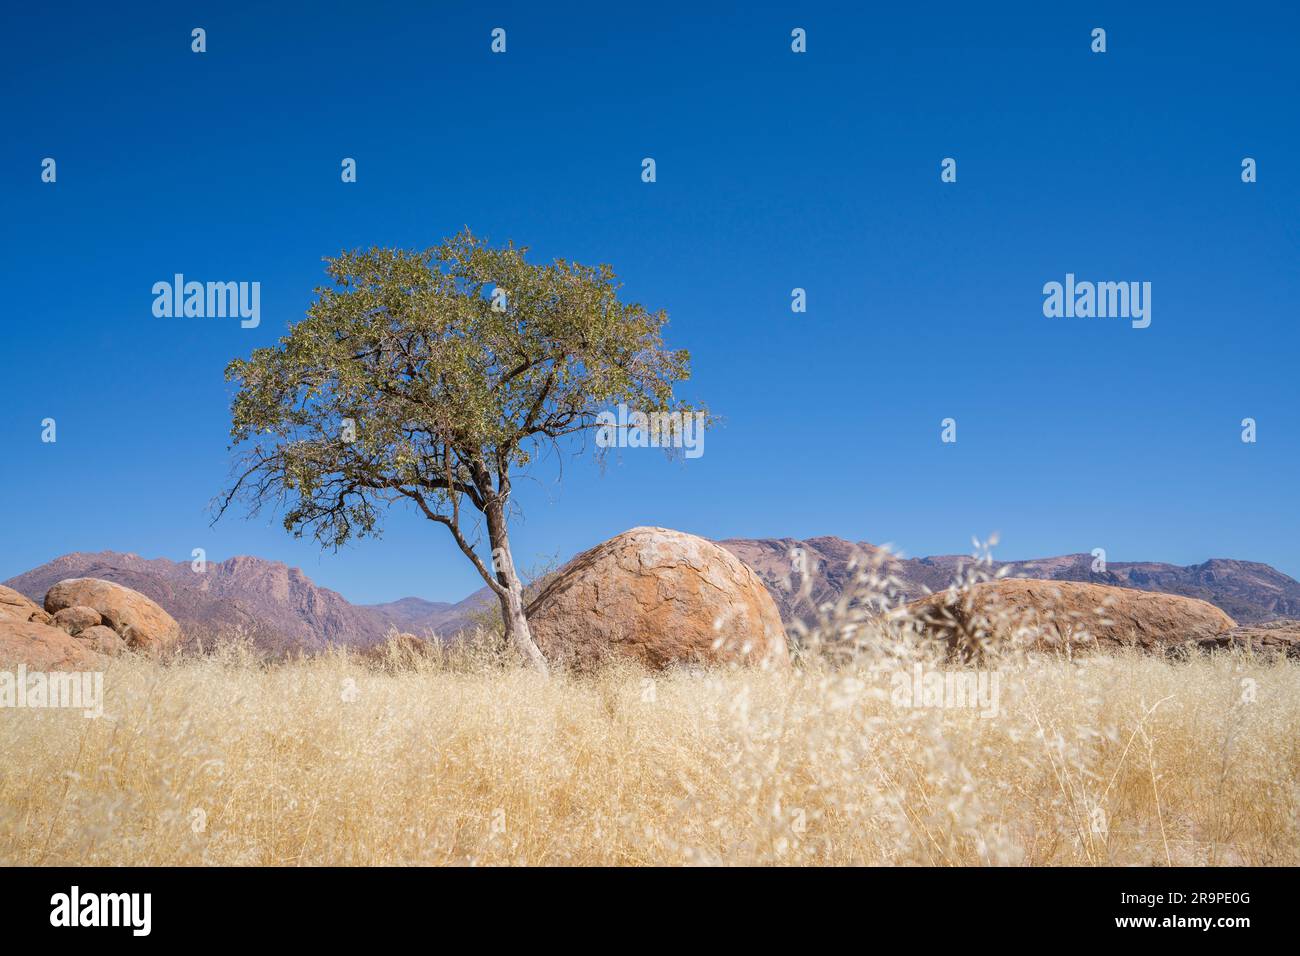 Acacia tree stands beside an orange rock in the desert. Damaraland, Namibia, Africa Stock Photo